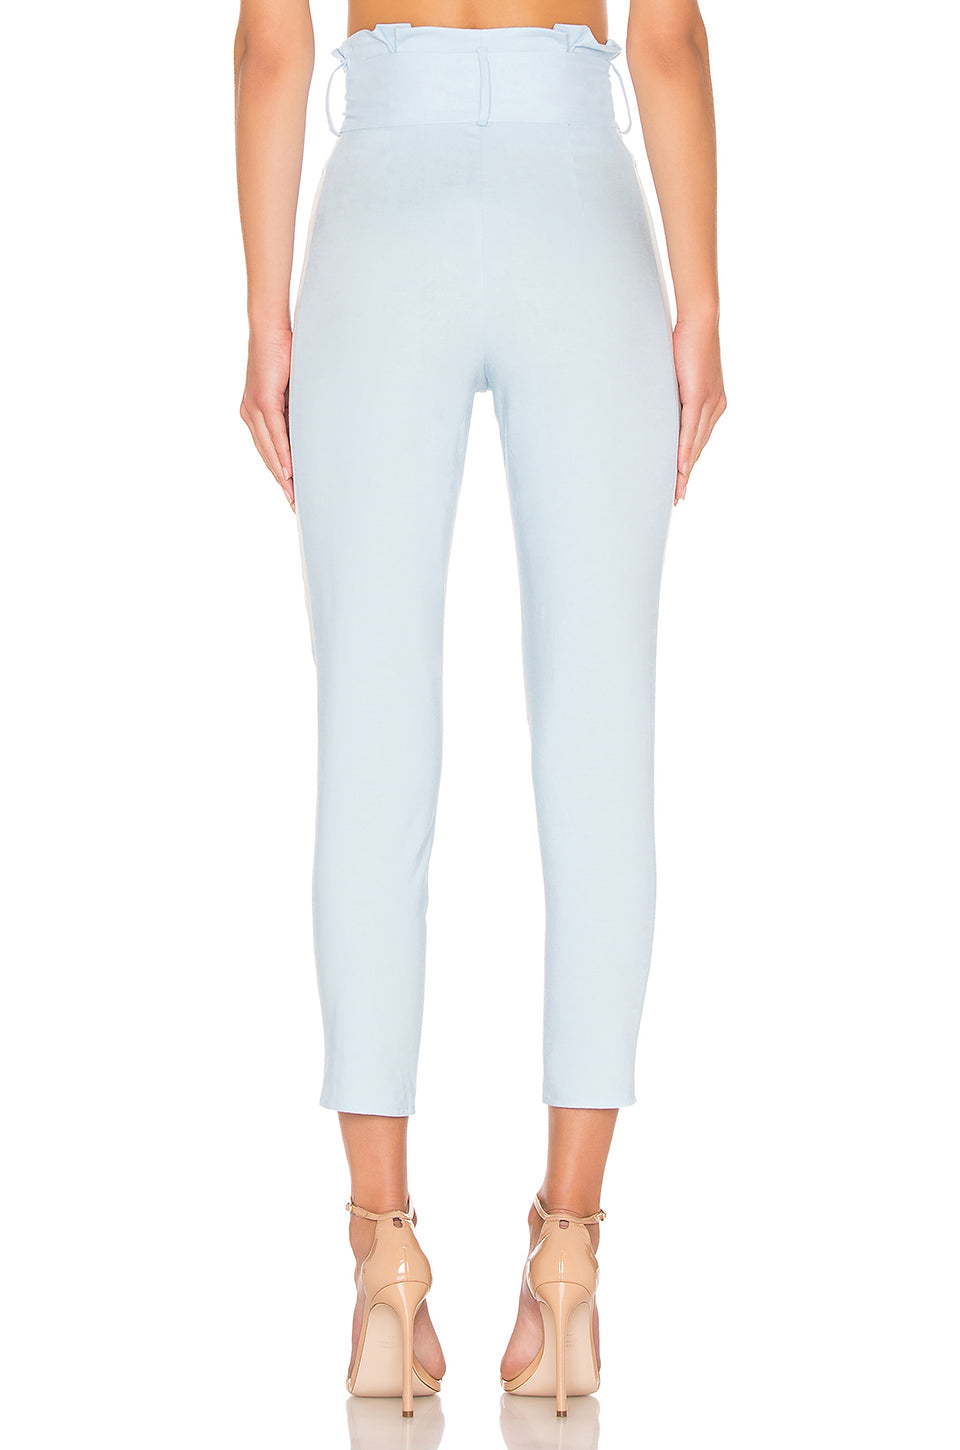 Greyson Jogger in BABY BLUE